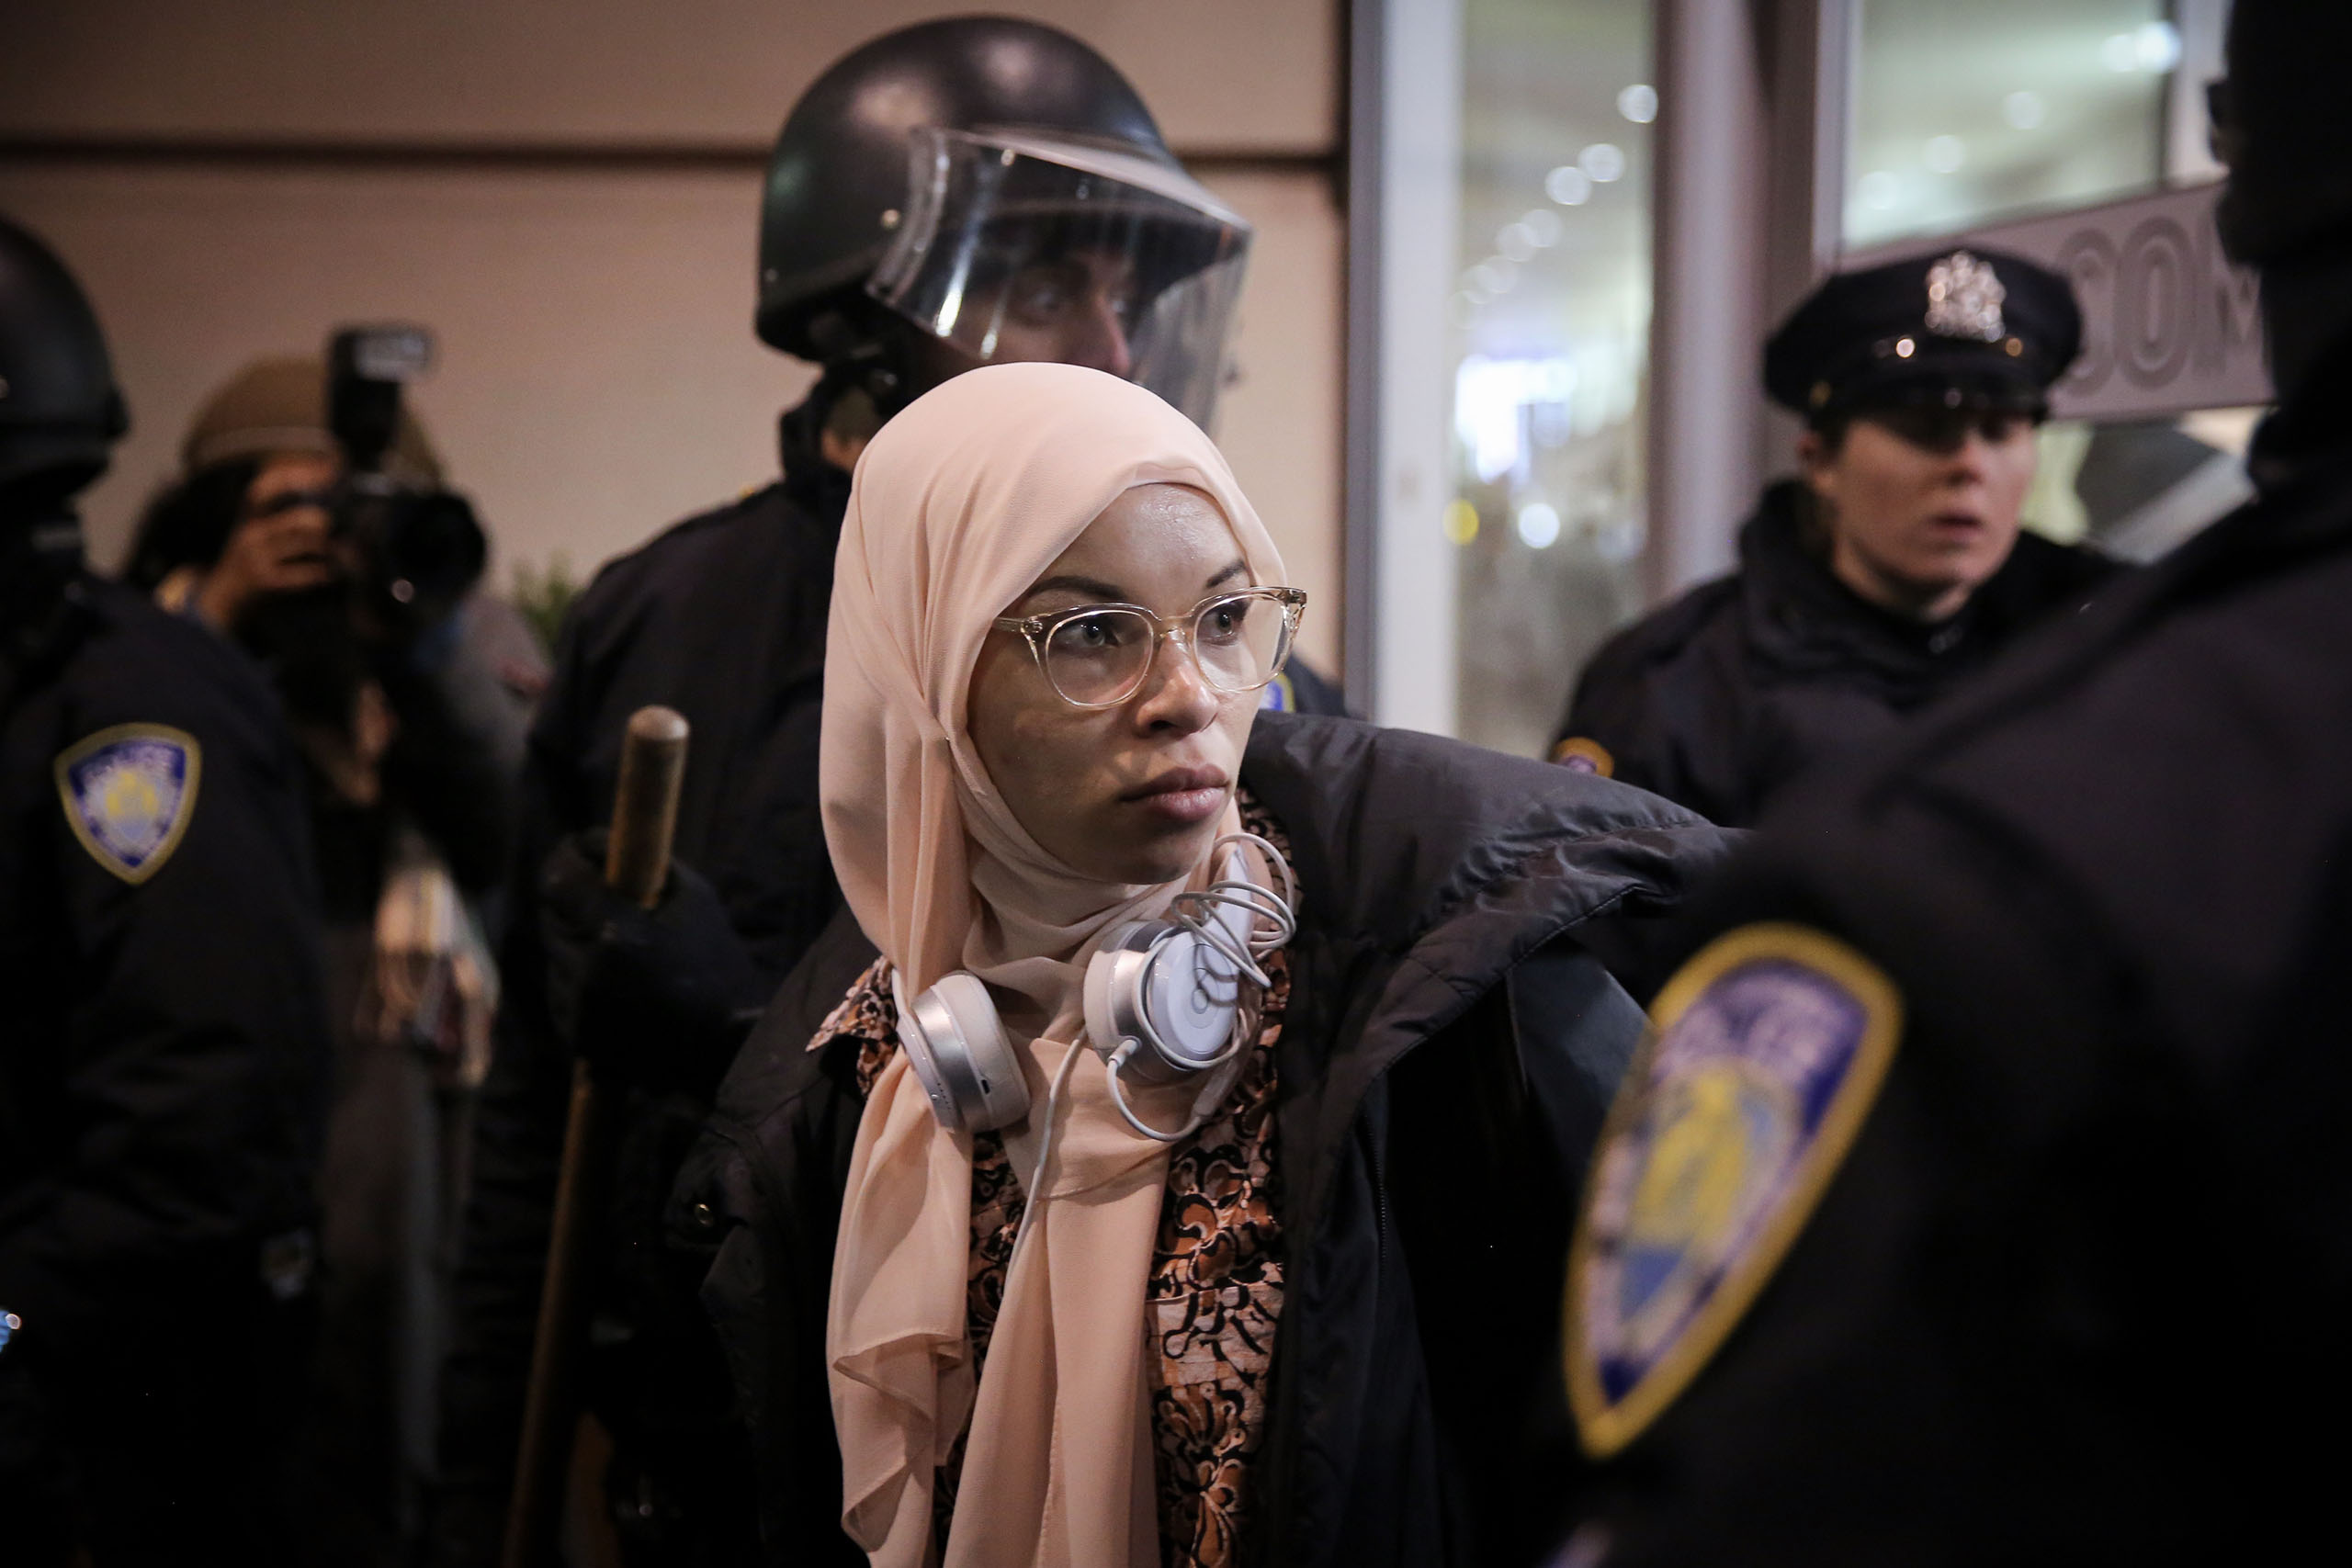 Blair Imani, an activist living in New York, at John F. Kennedy International Airport during the protests against the President's new imigration policies in New York, on Jan. 28, 2017.